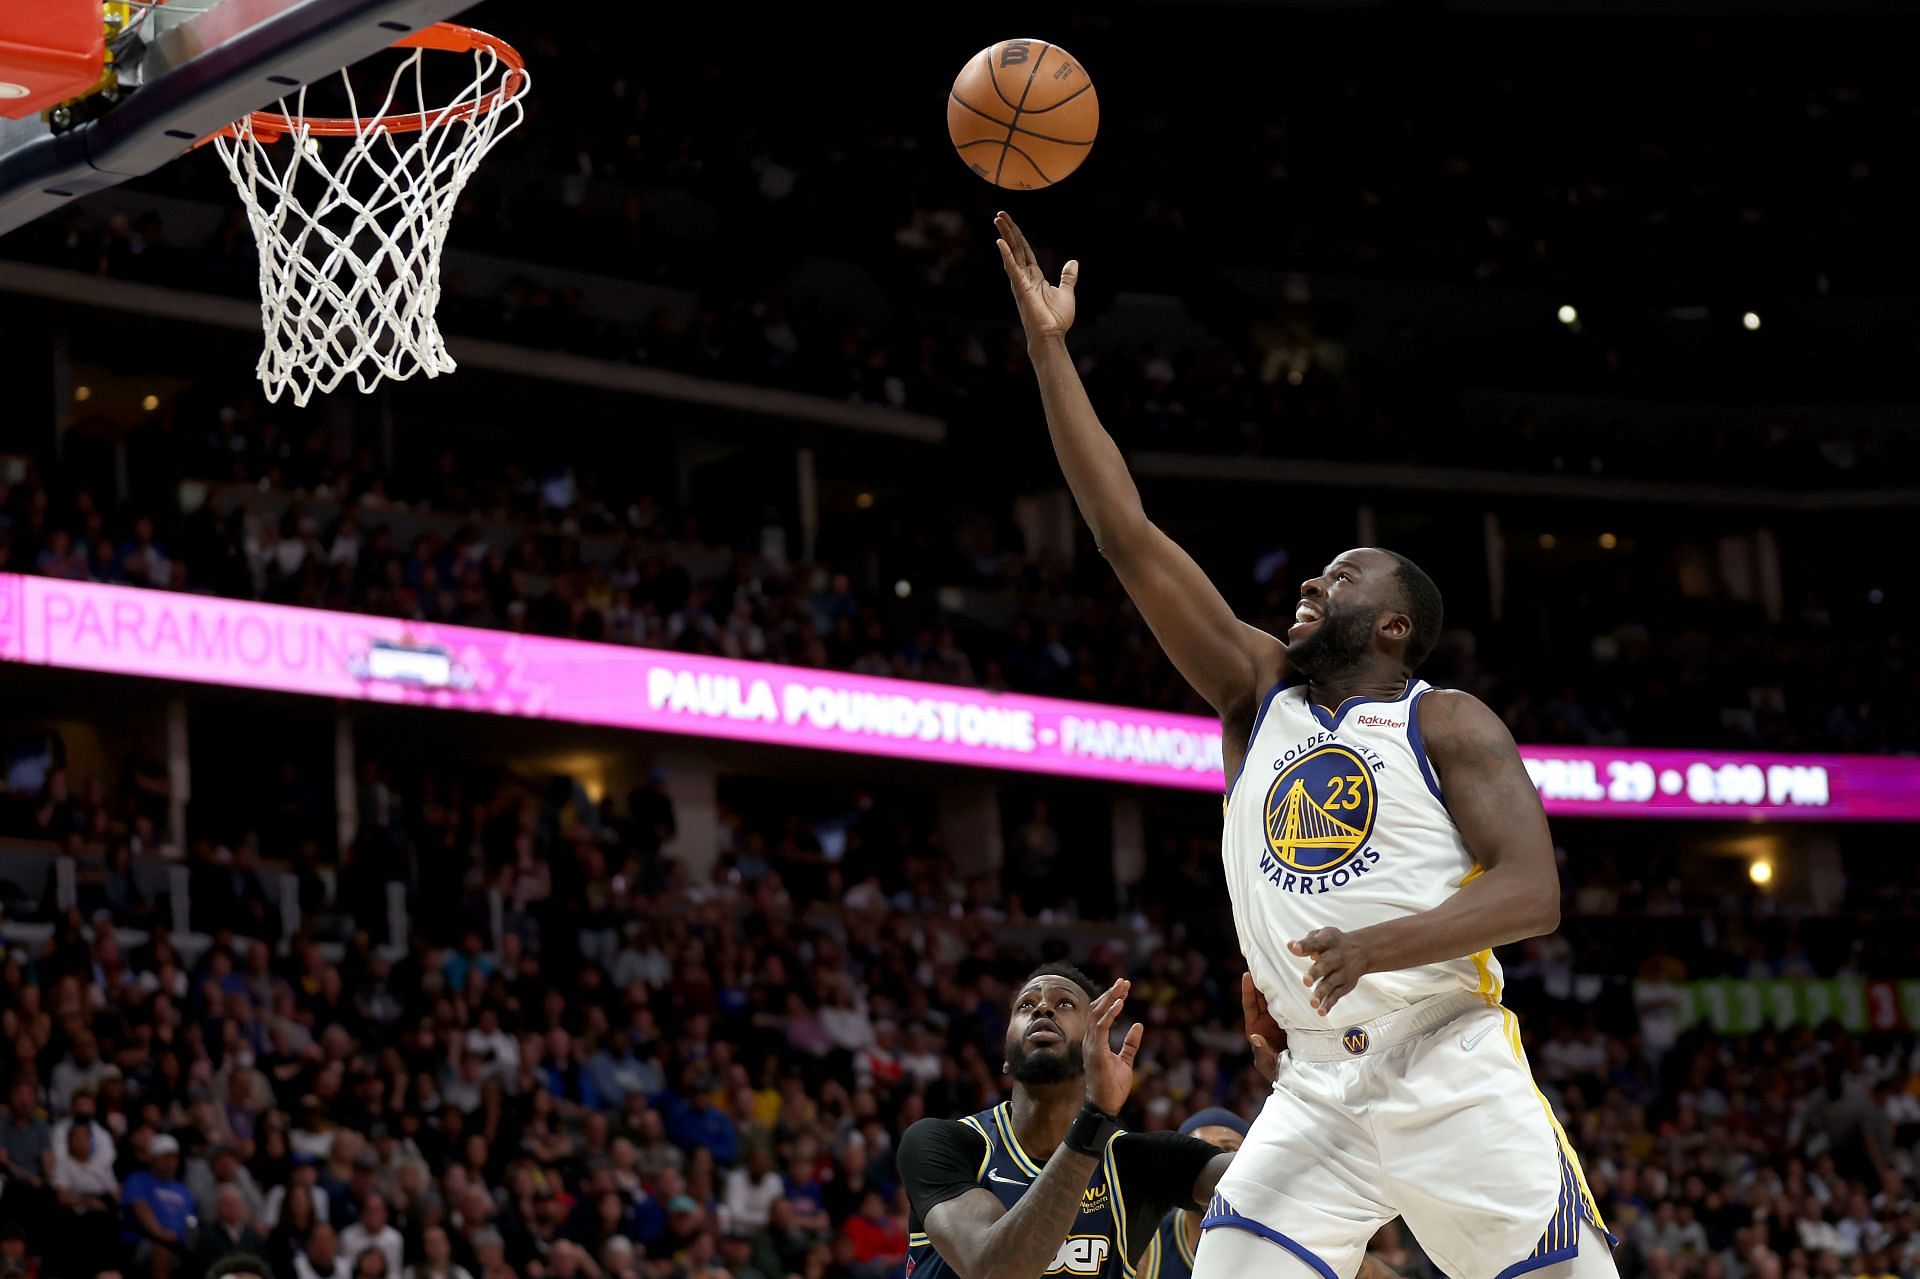 Draymond Green #23 of the Golden State Warriors goes to the basket against Will Barton #5 of the Denver Nuggets in the fourth quarter during Game 4 of the Western Conference First Round NBA Playoffs at Ball Arena on April 24, 2022, in Denver, Colorado .